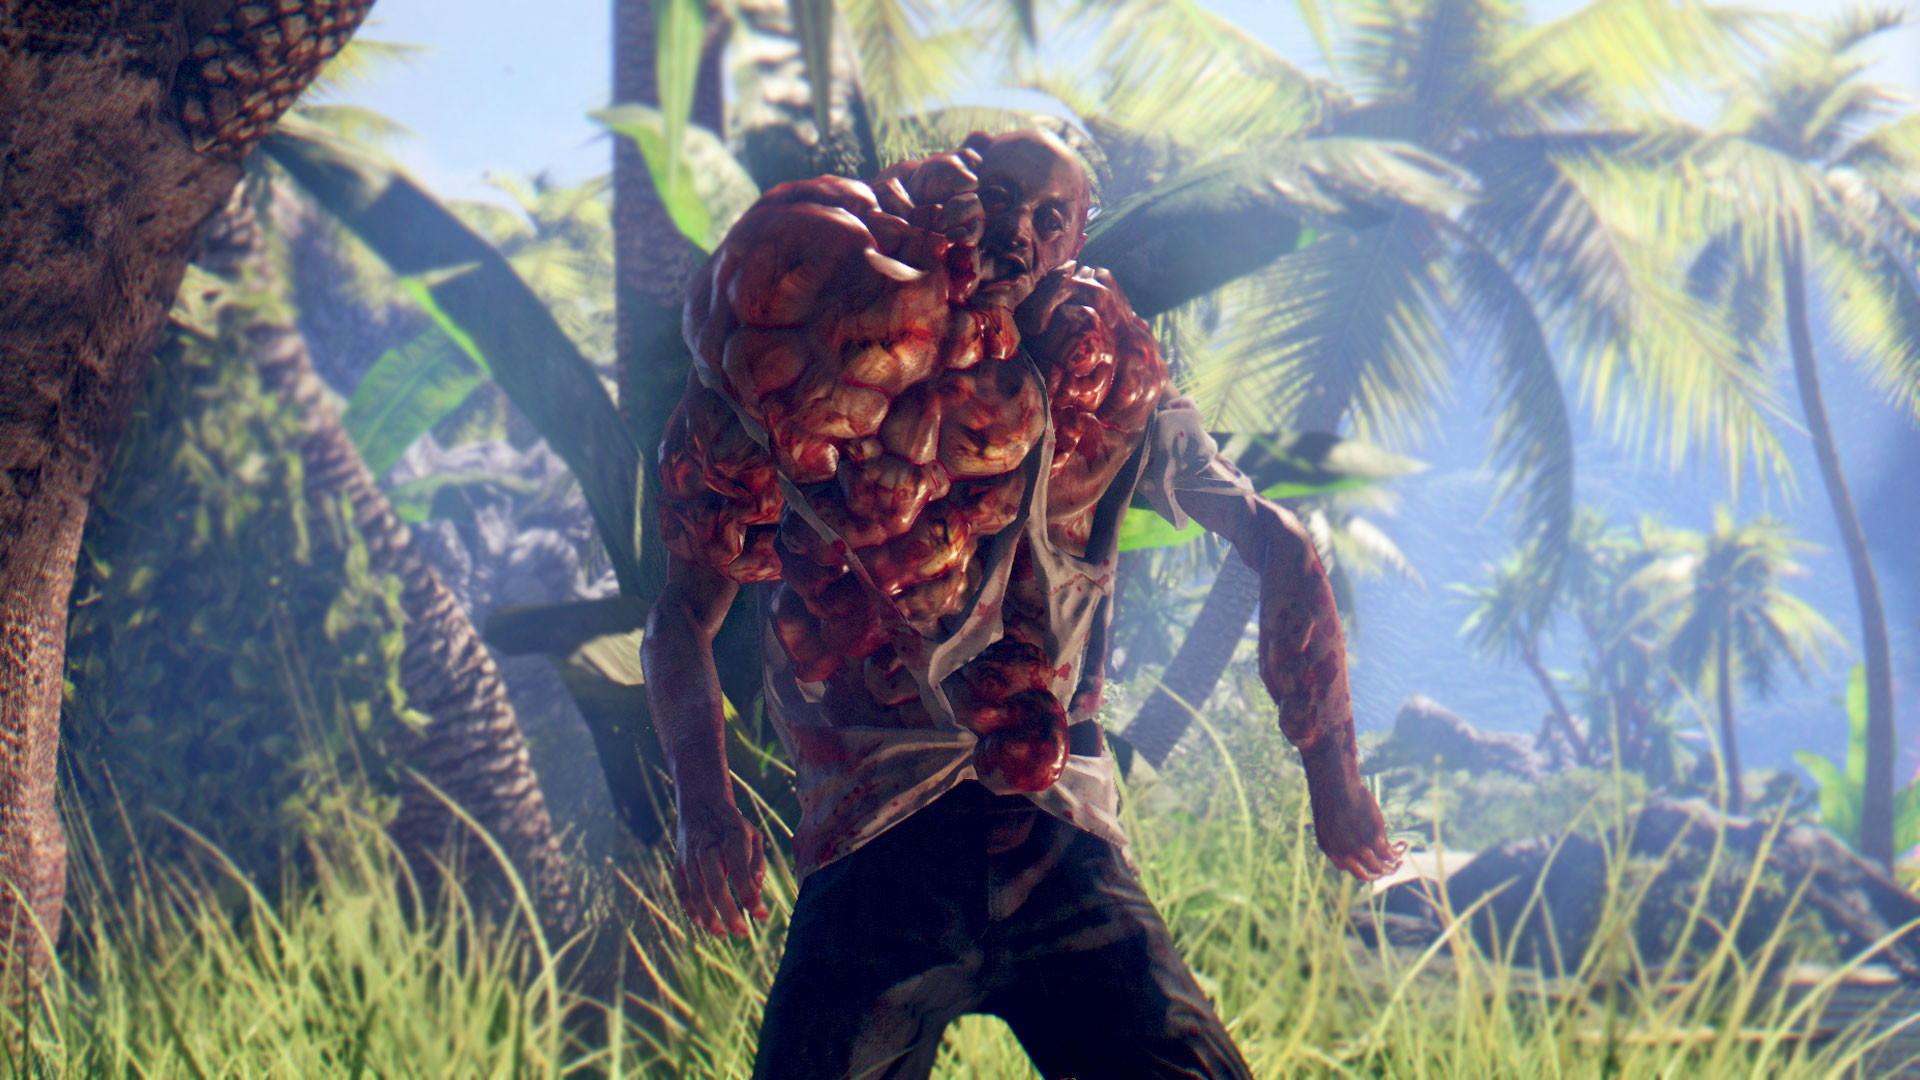 Dead Island Definitive Edition system requirements